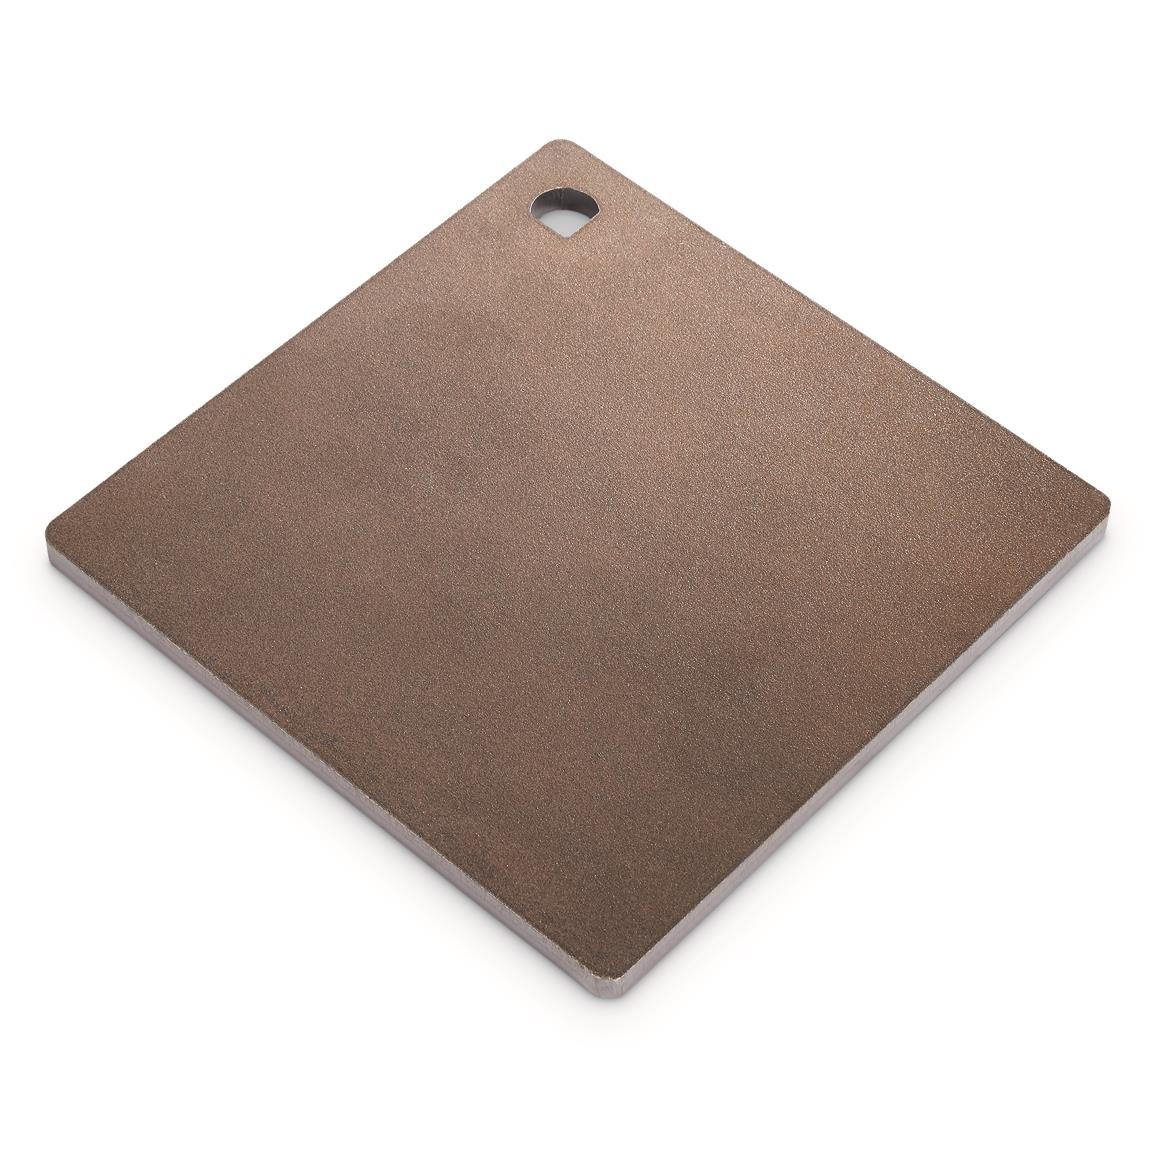 CTS AR500 Hardened Steel Plate Shooting Target, 3/8" Thick